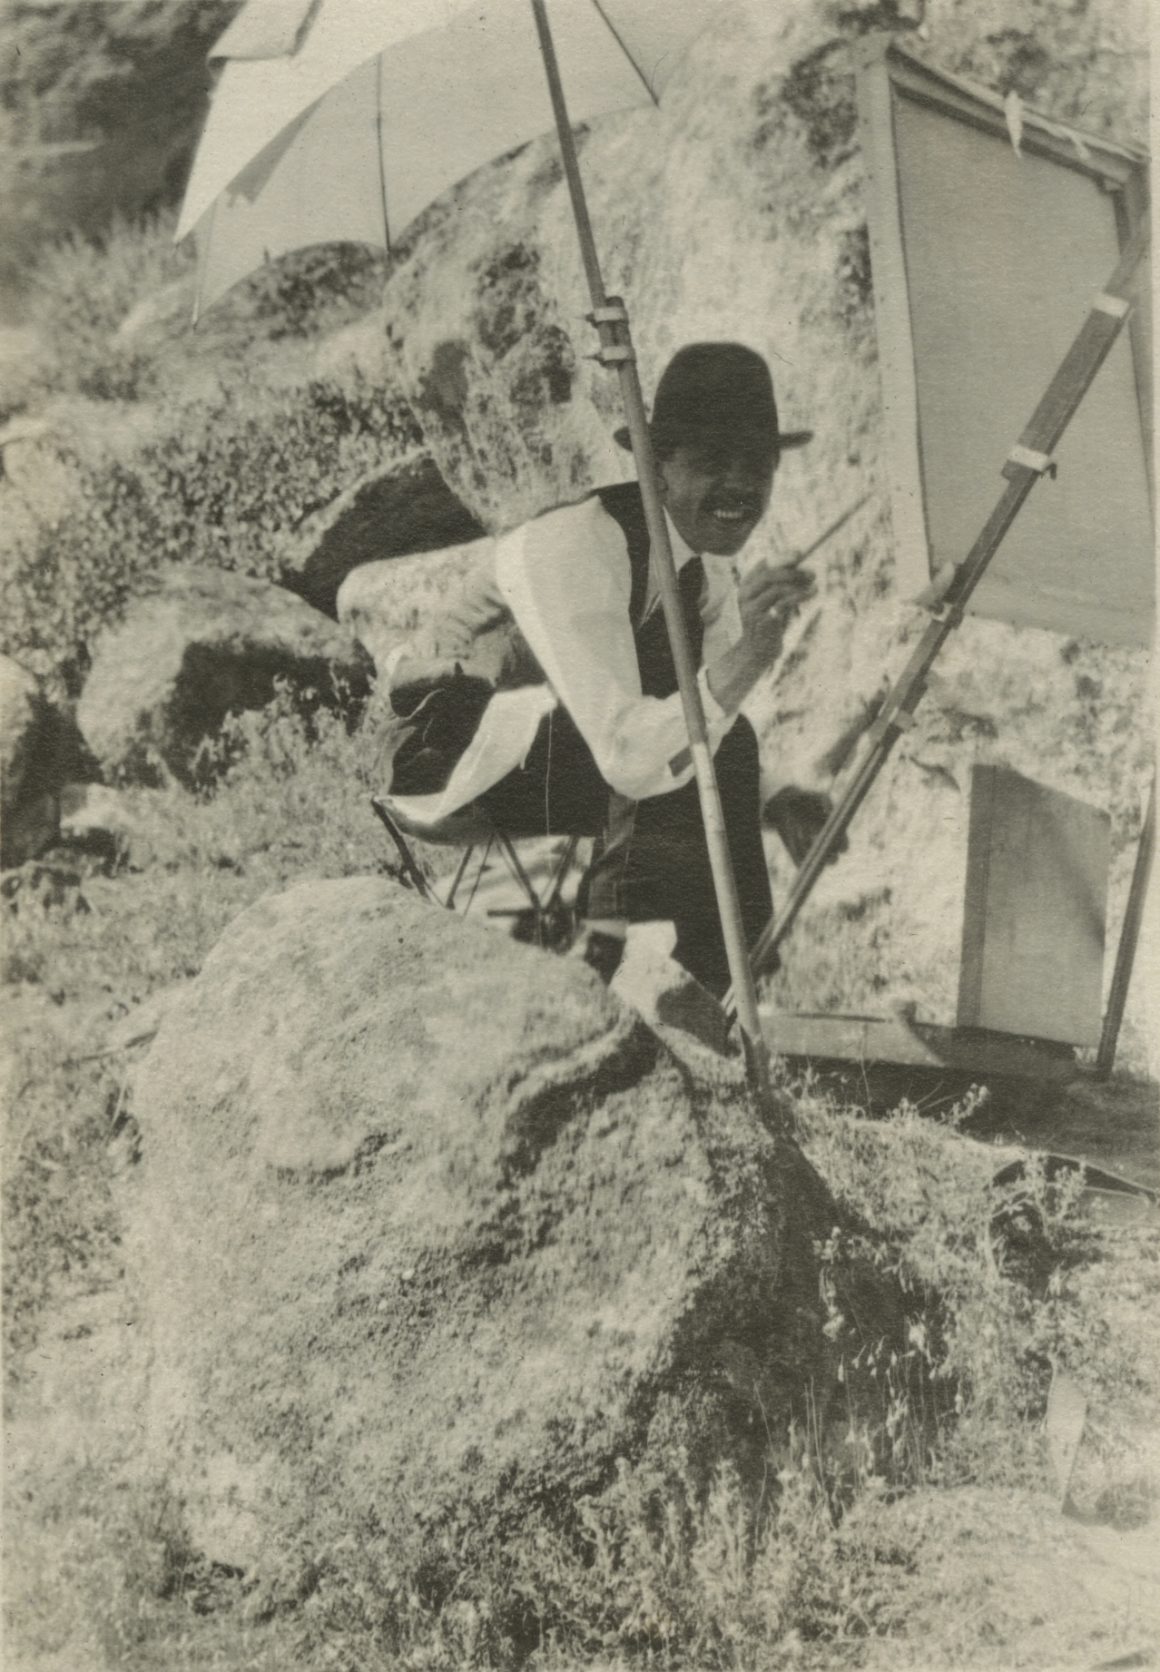 A black and white photograph of Raymond Jonson painting in Boulder Colorado, 1917